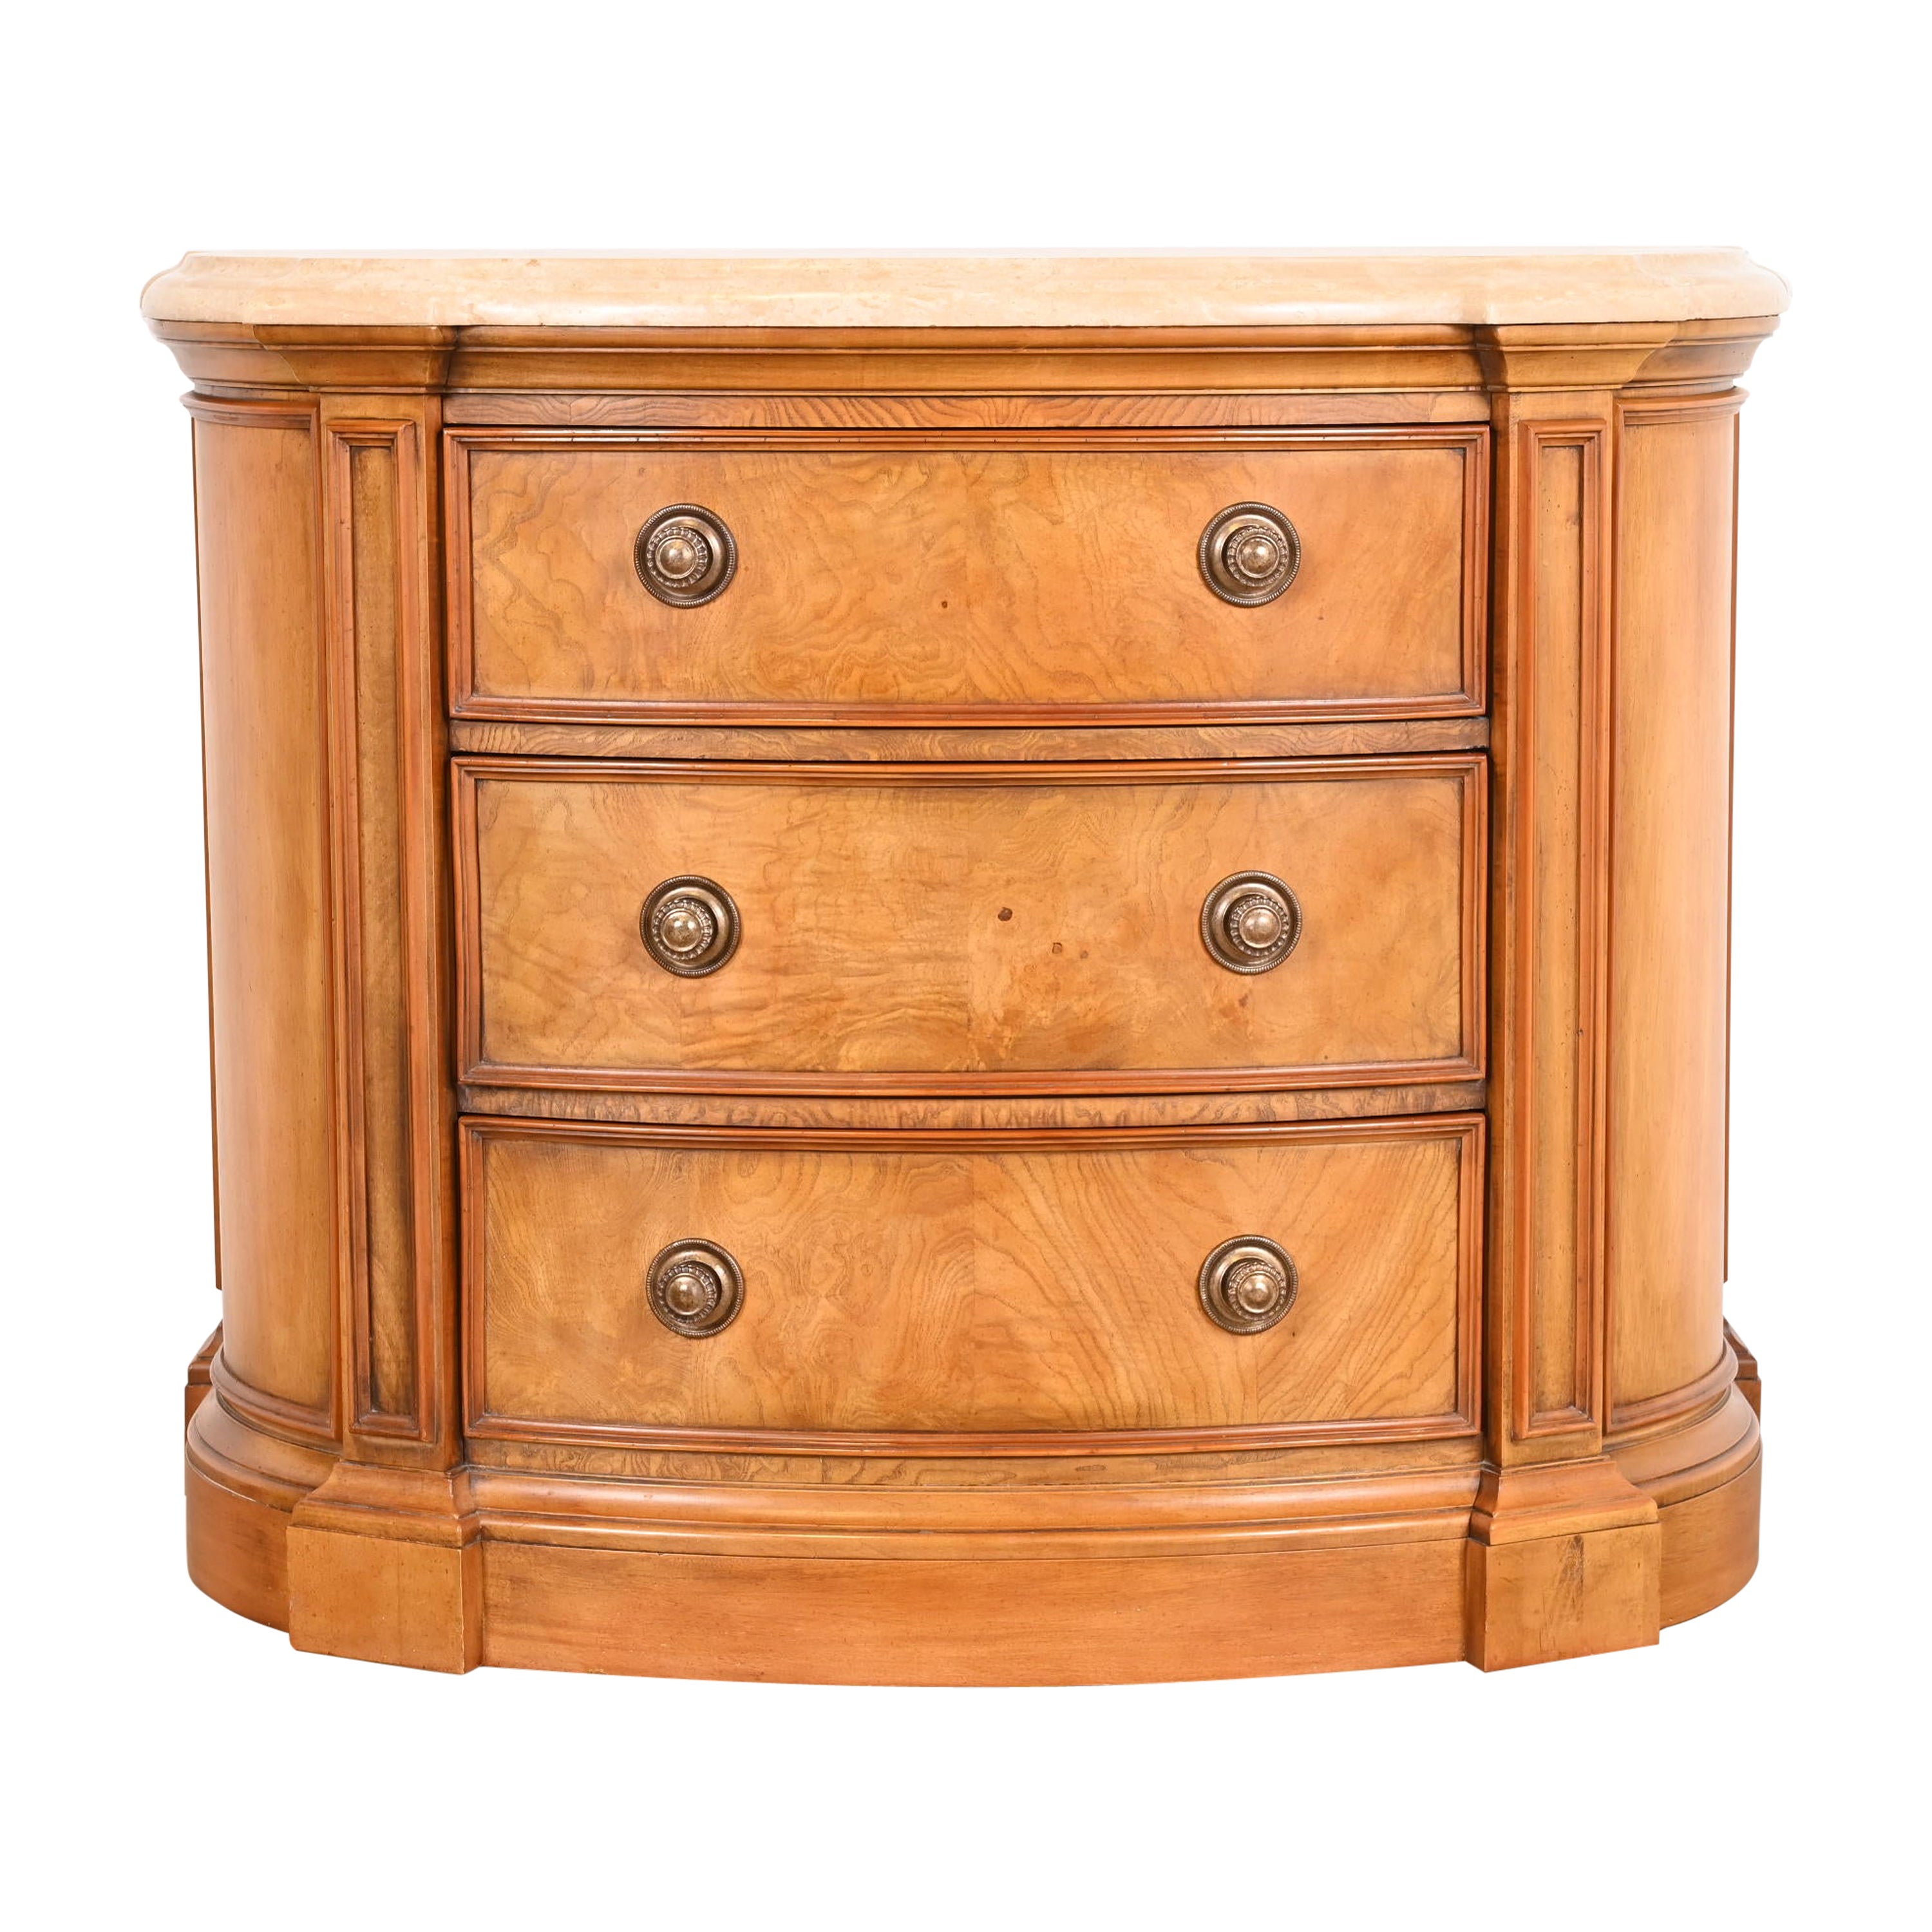 Henredon Burl Wood Regency Marble Top Demilune Commode or Chest of Drawers